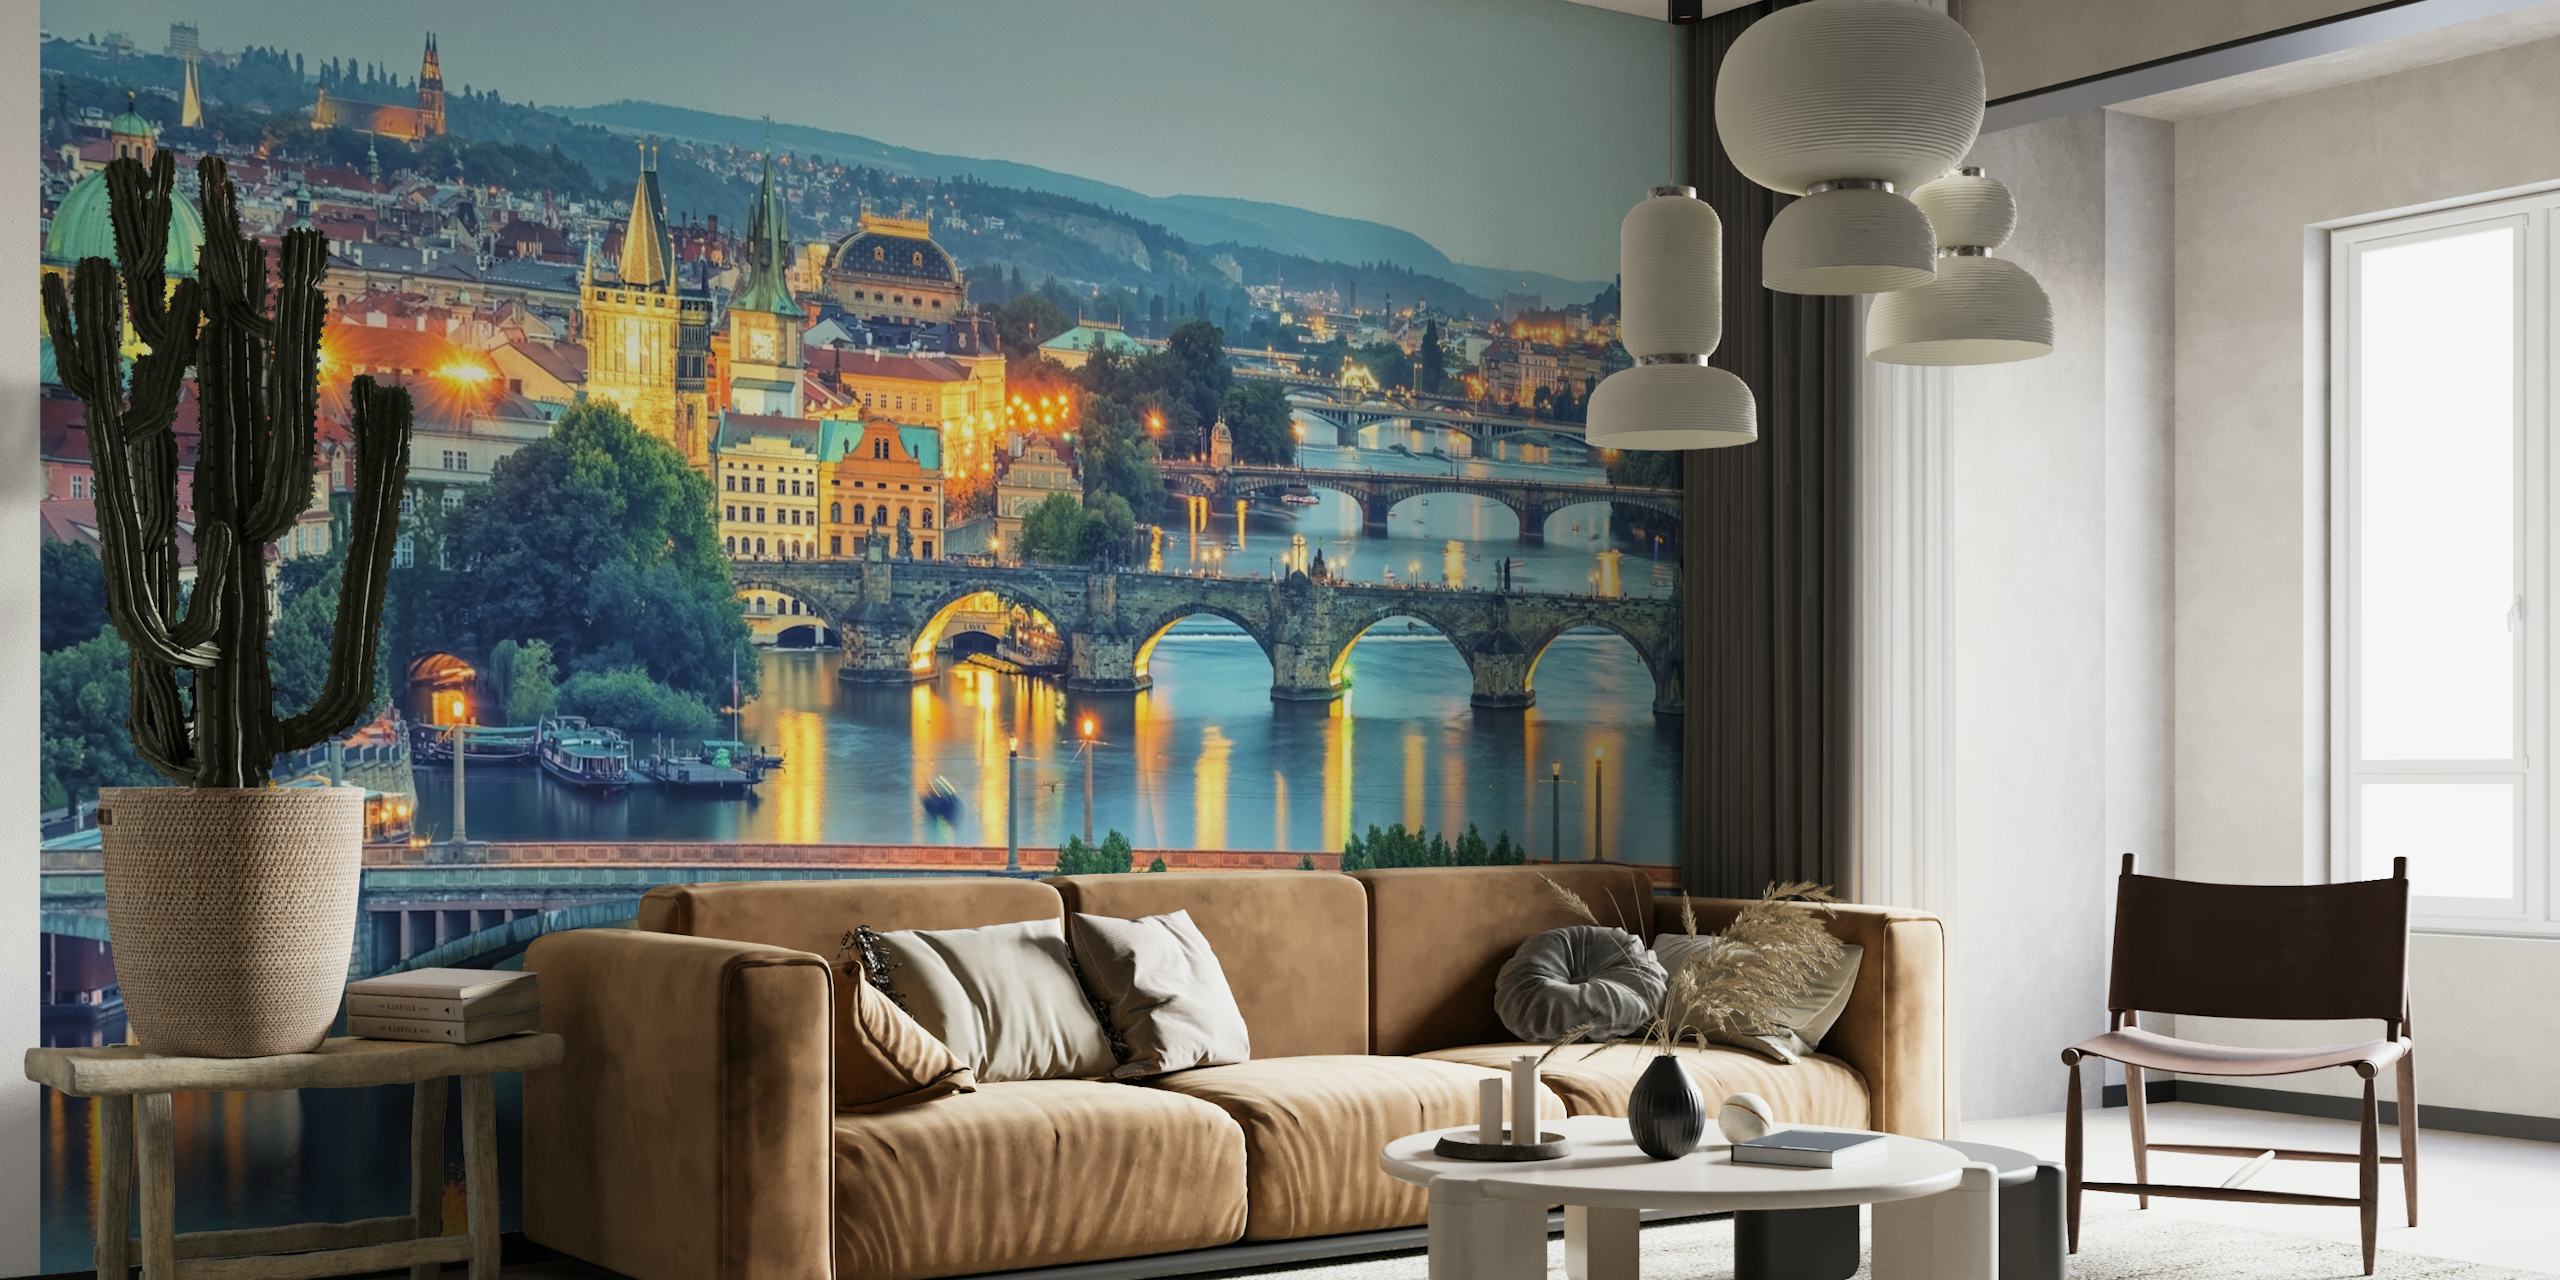 Twilight over Prague skyline wall mural with bridges and blue hues